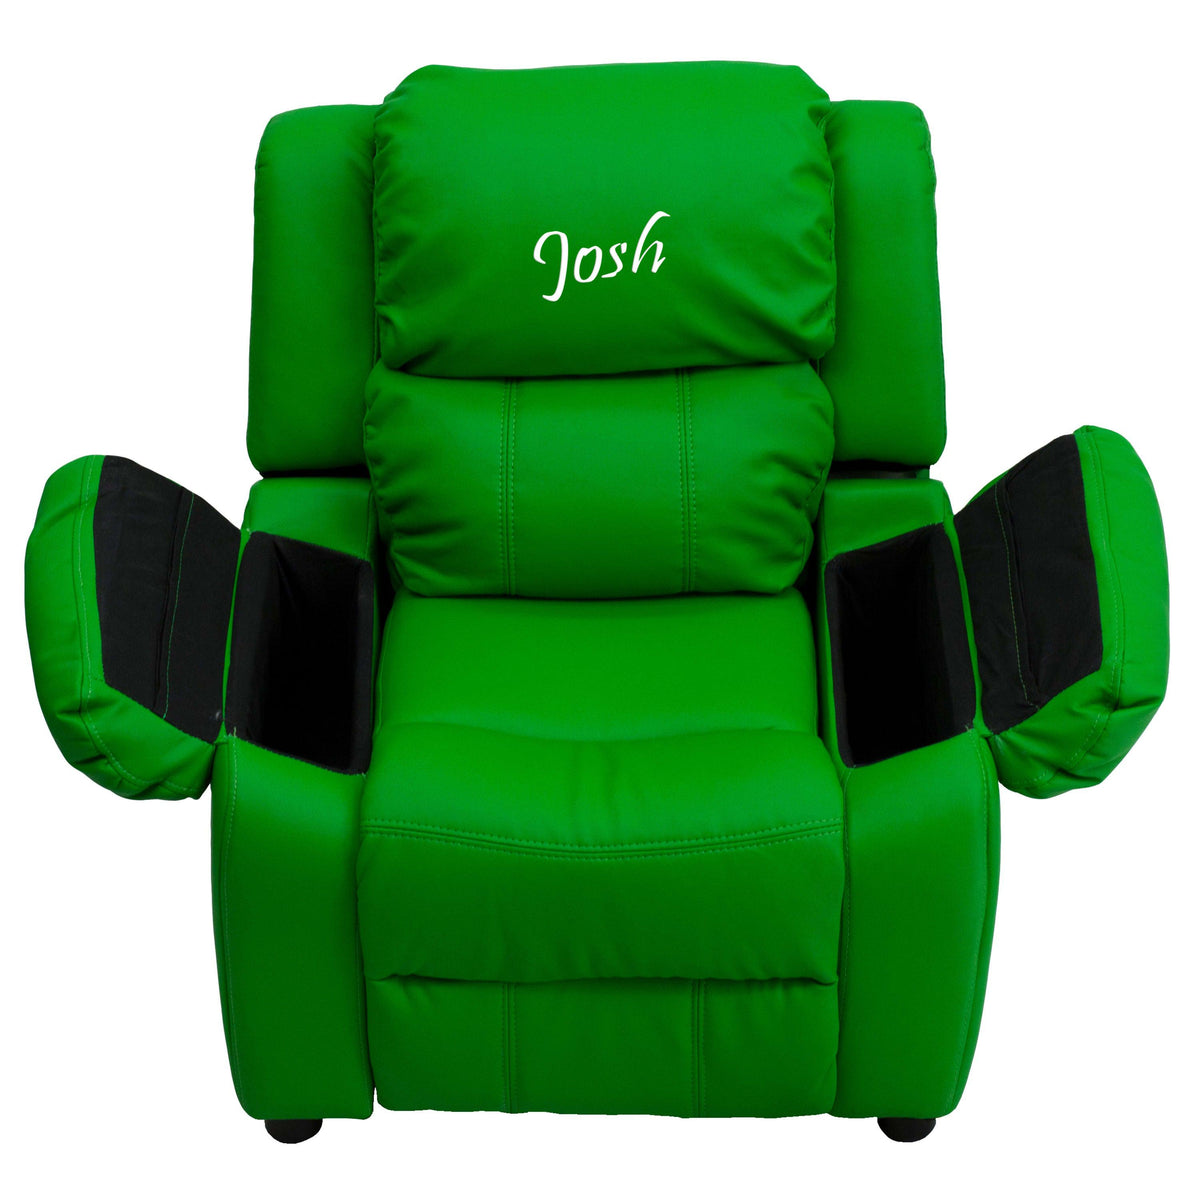 Green Vinyl |#| Personalized Deluxe Padded Green Vinyl Kids Recliner with Storage Arms